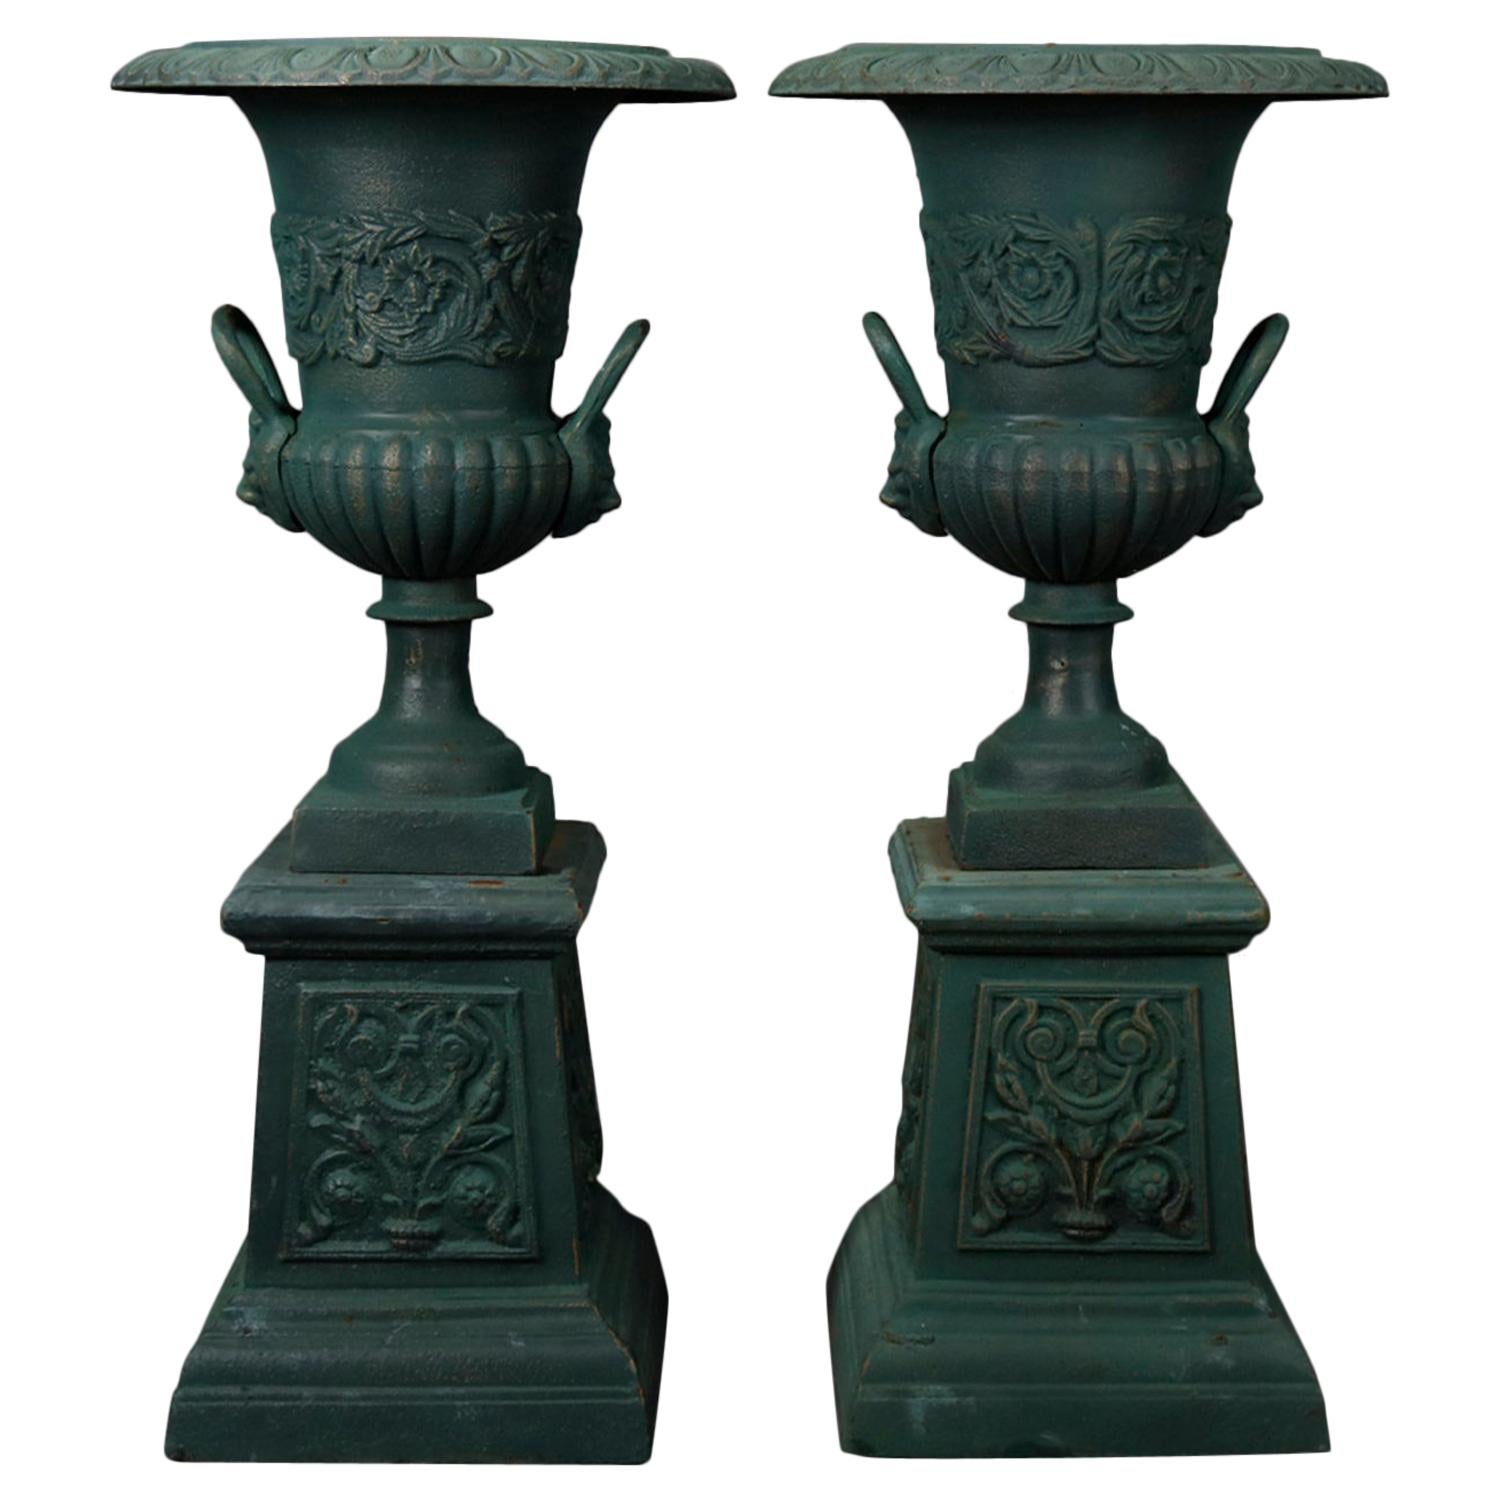 Pair of French Classical Painted Cast Iron Garden Urns with Plinths 20th Century